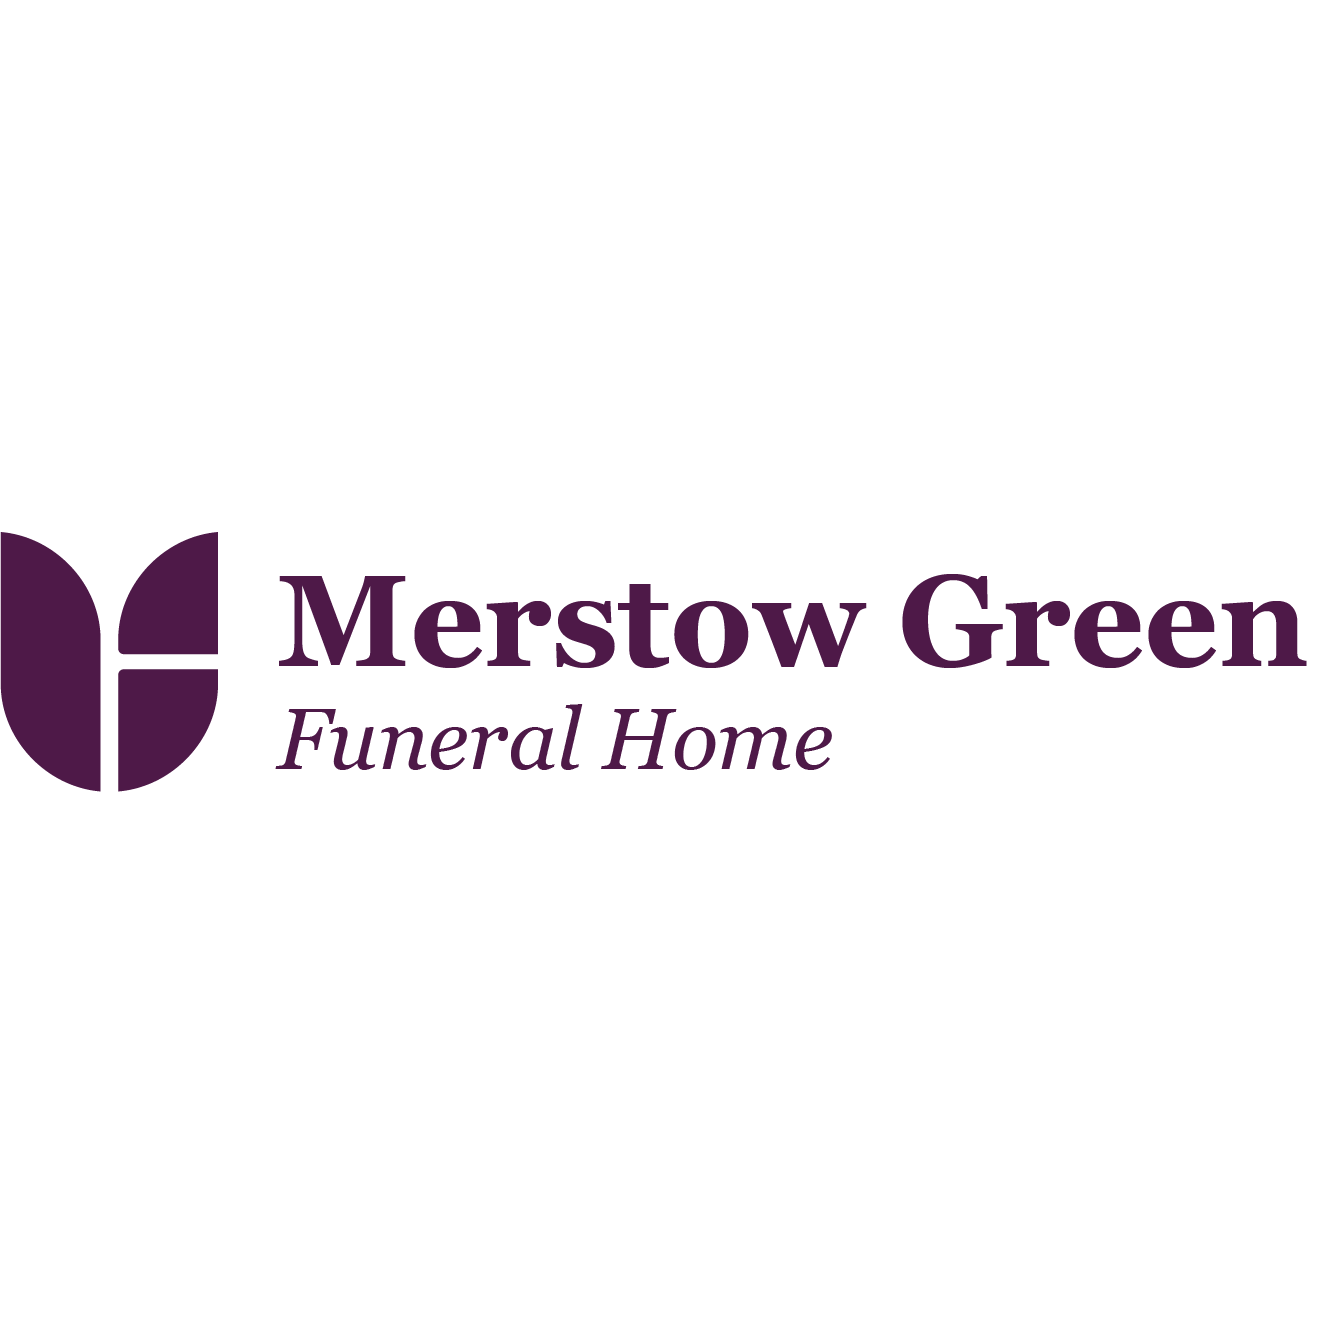 Merstow Green Funeral Home - Evesham, Worcestershire WR11 4BD - 01386 571003 | ShowMeLocal.com